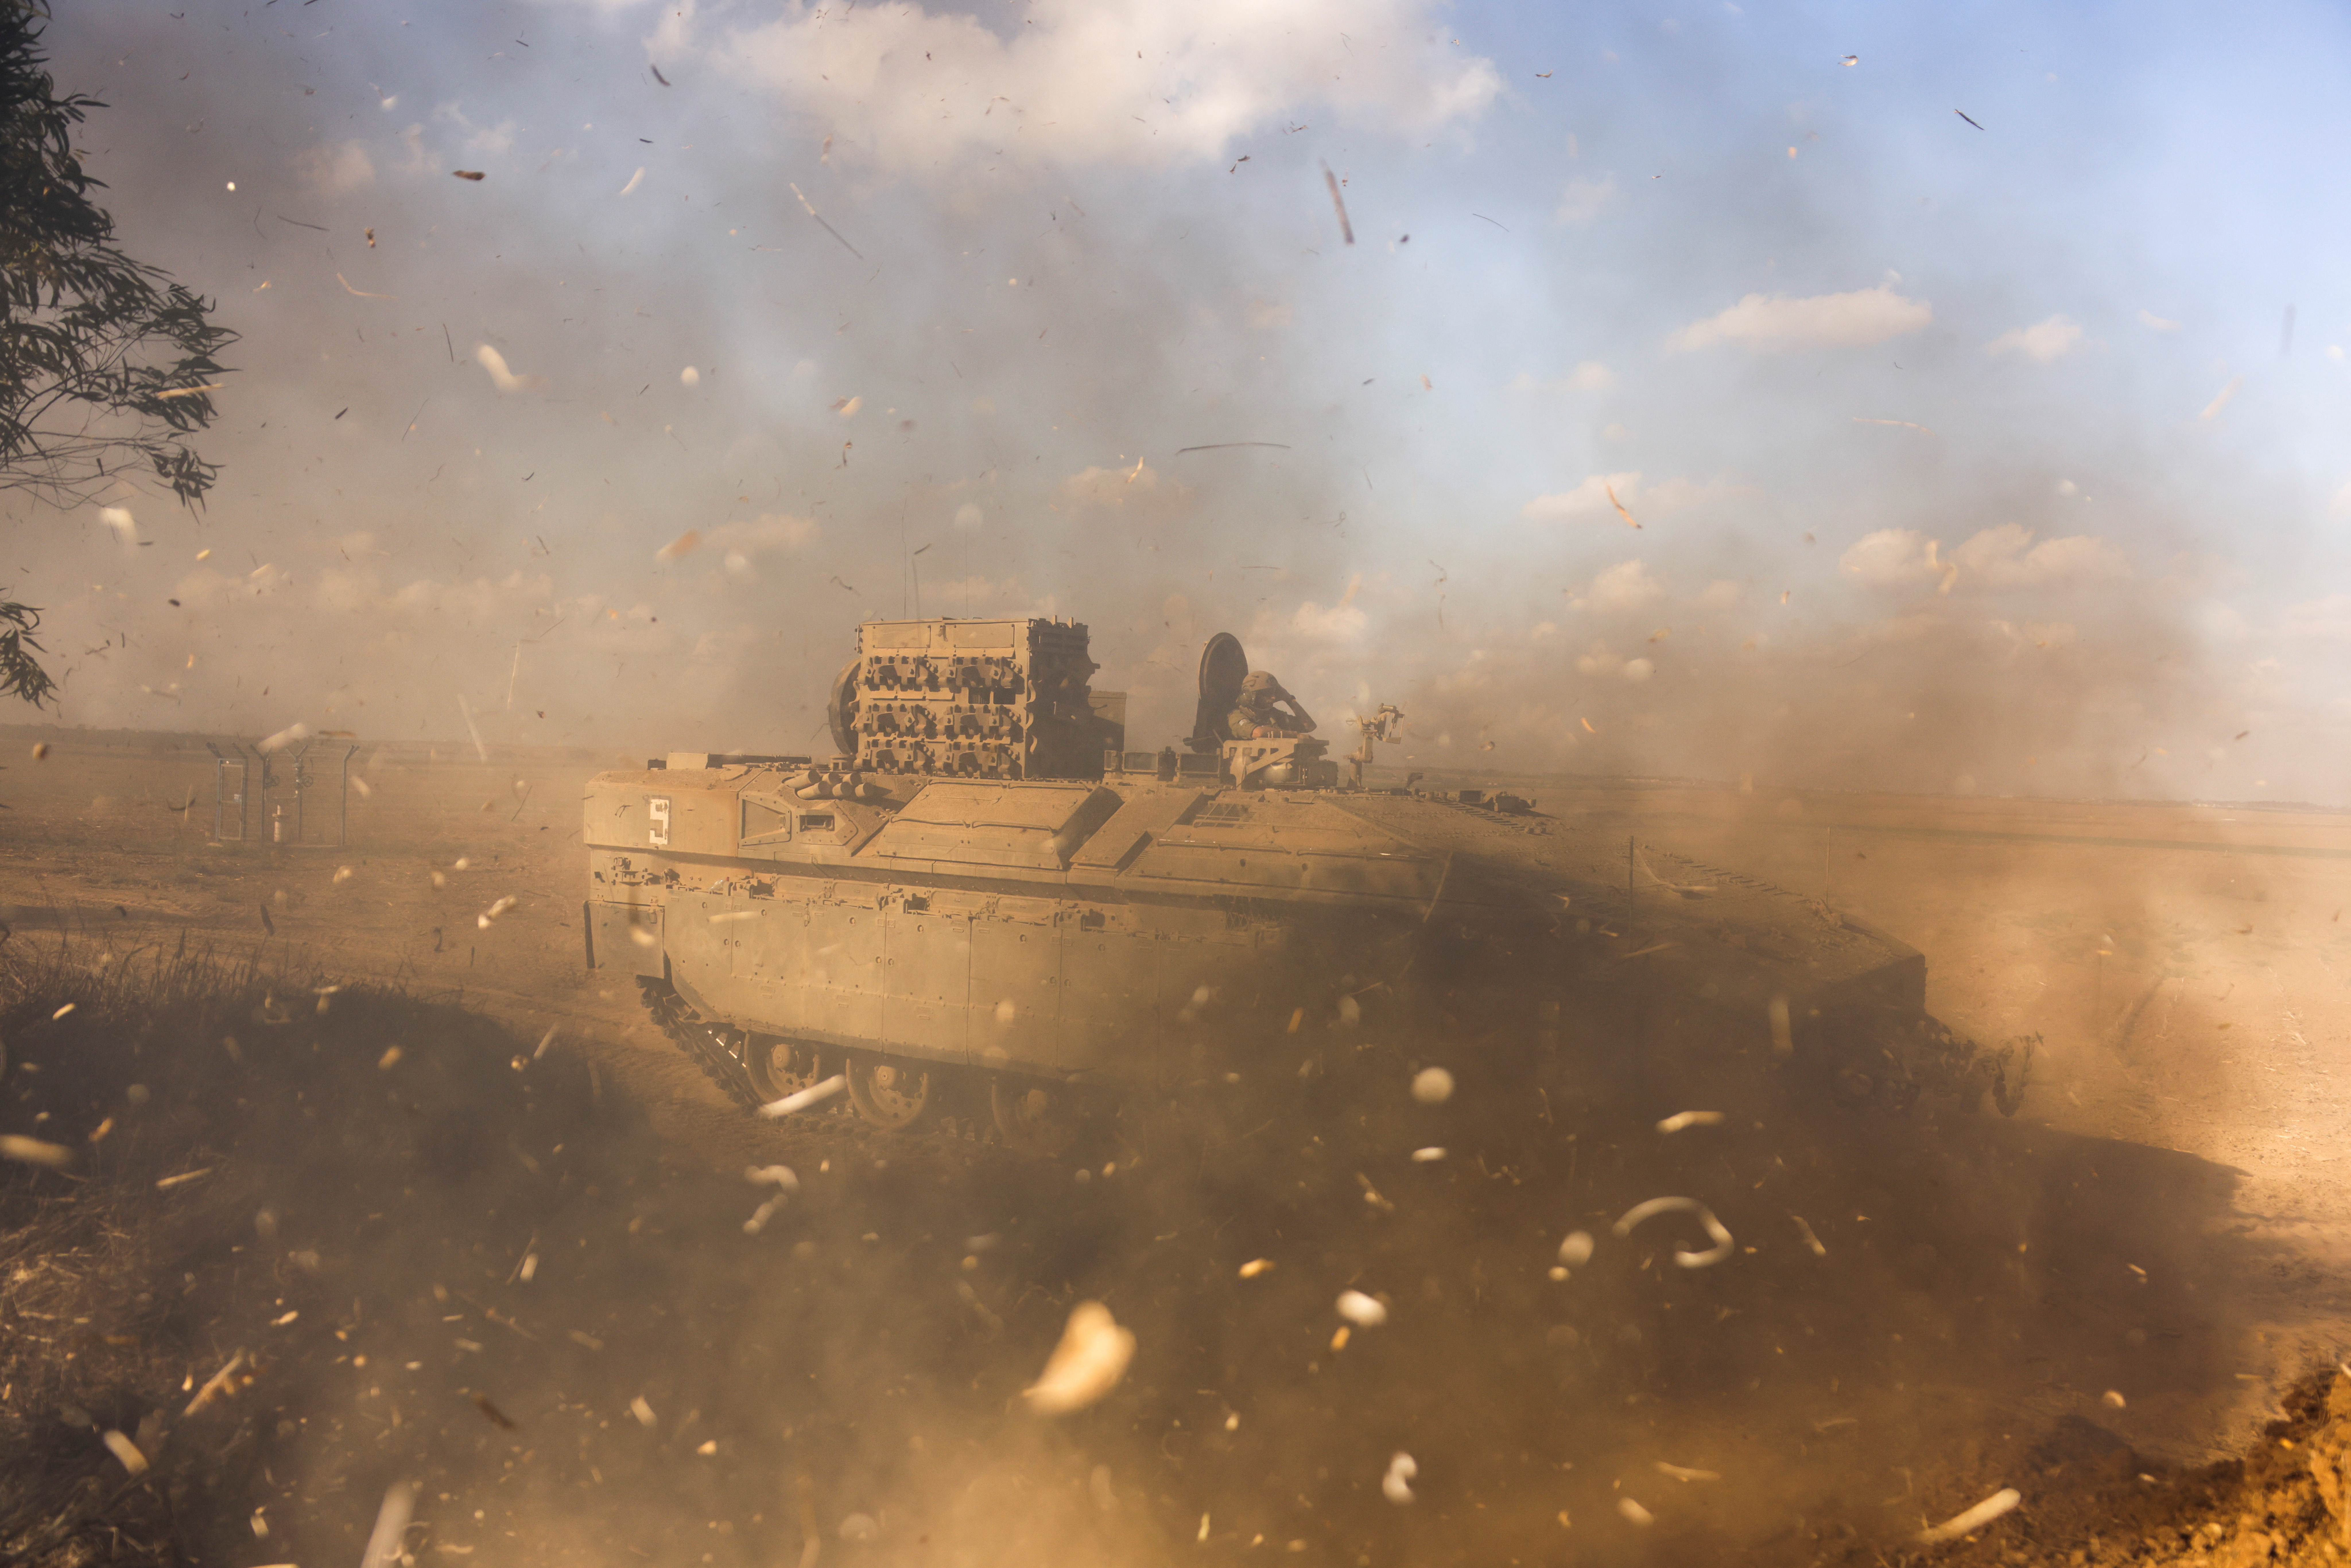 An Israeli Armoured Personnel Carrier (APC) is obscured as it whips up dust near Israel's border with the Gaza Strip, in southern Israel